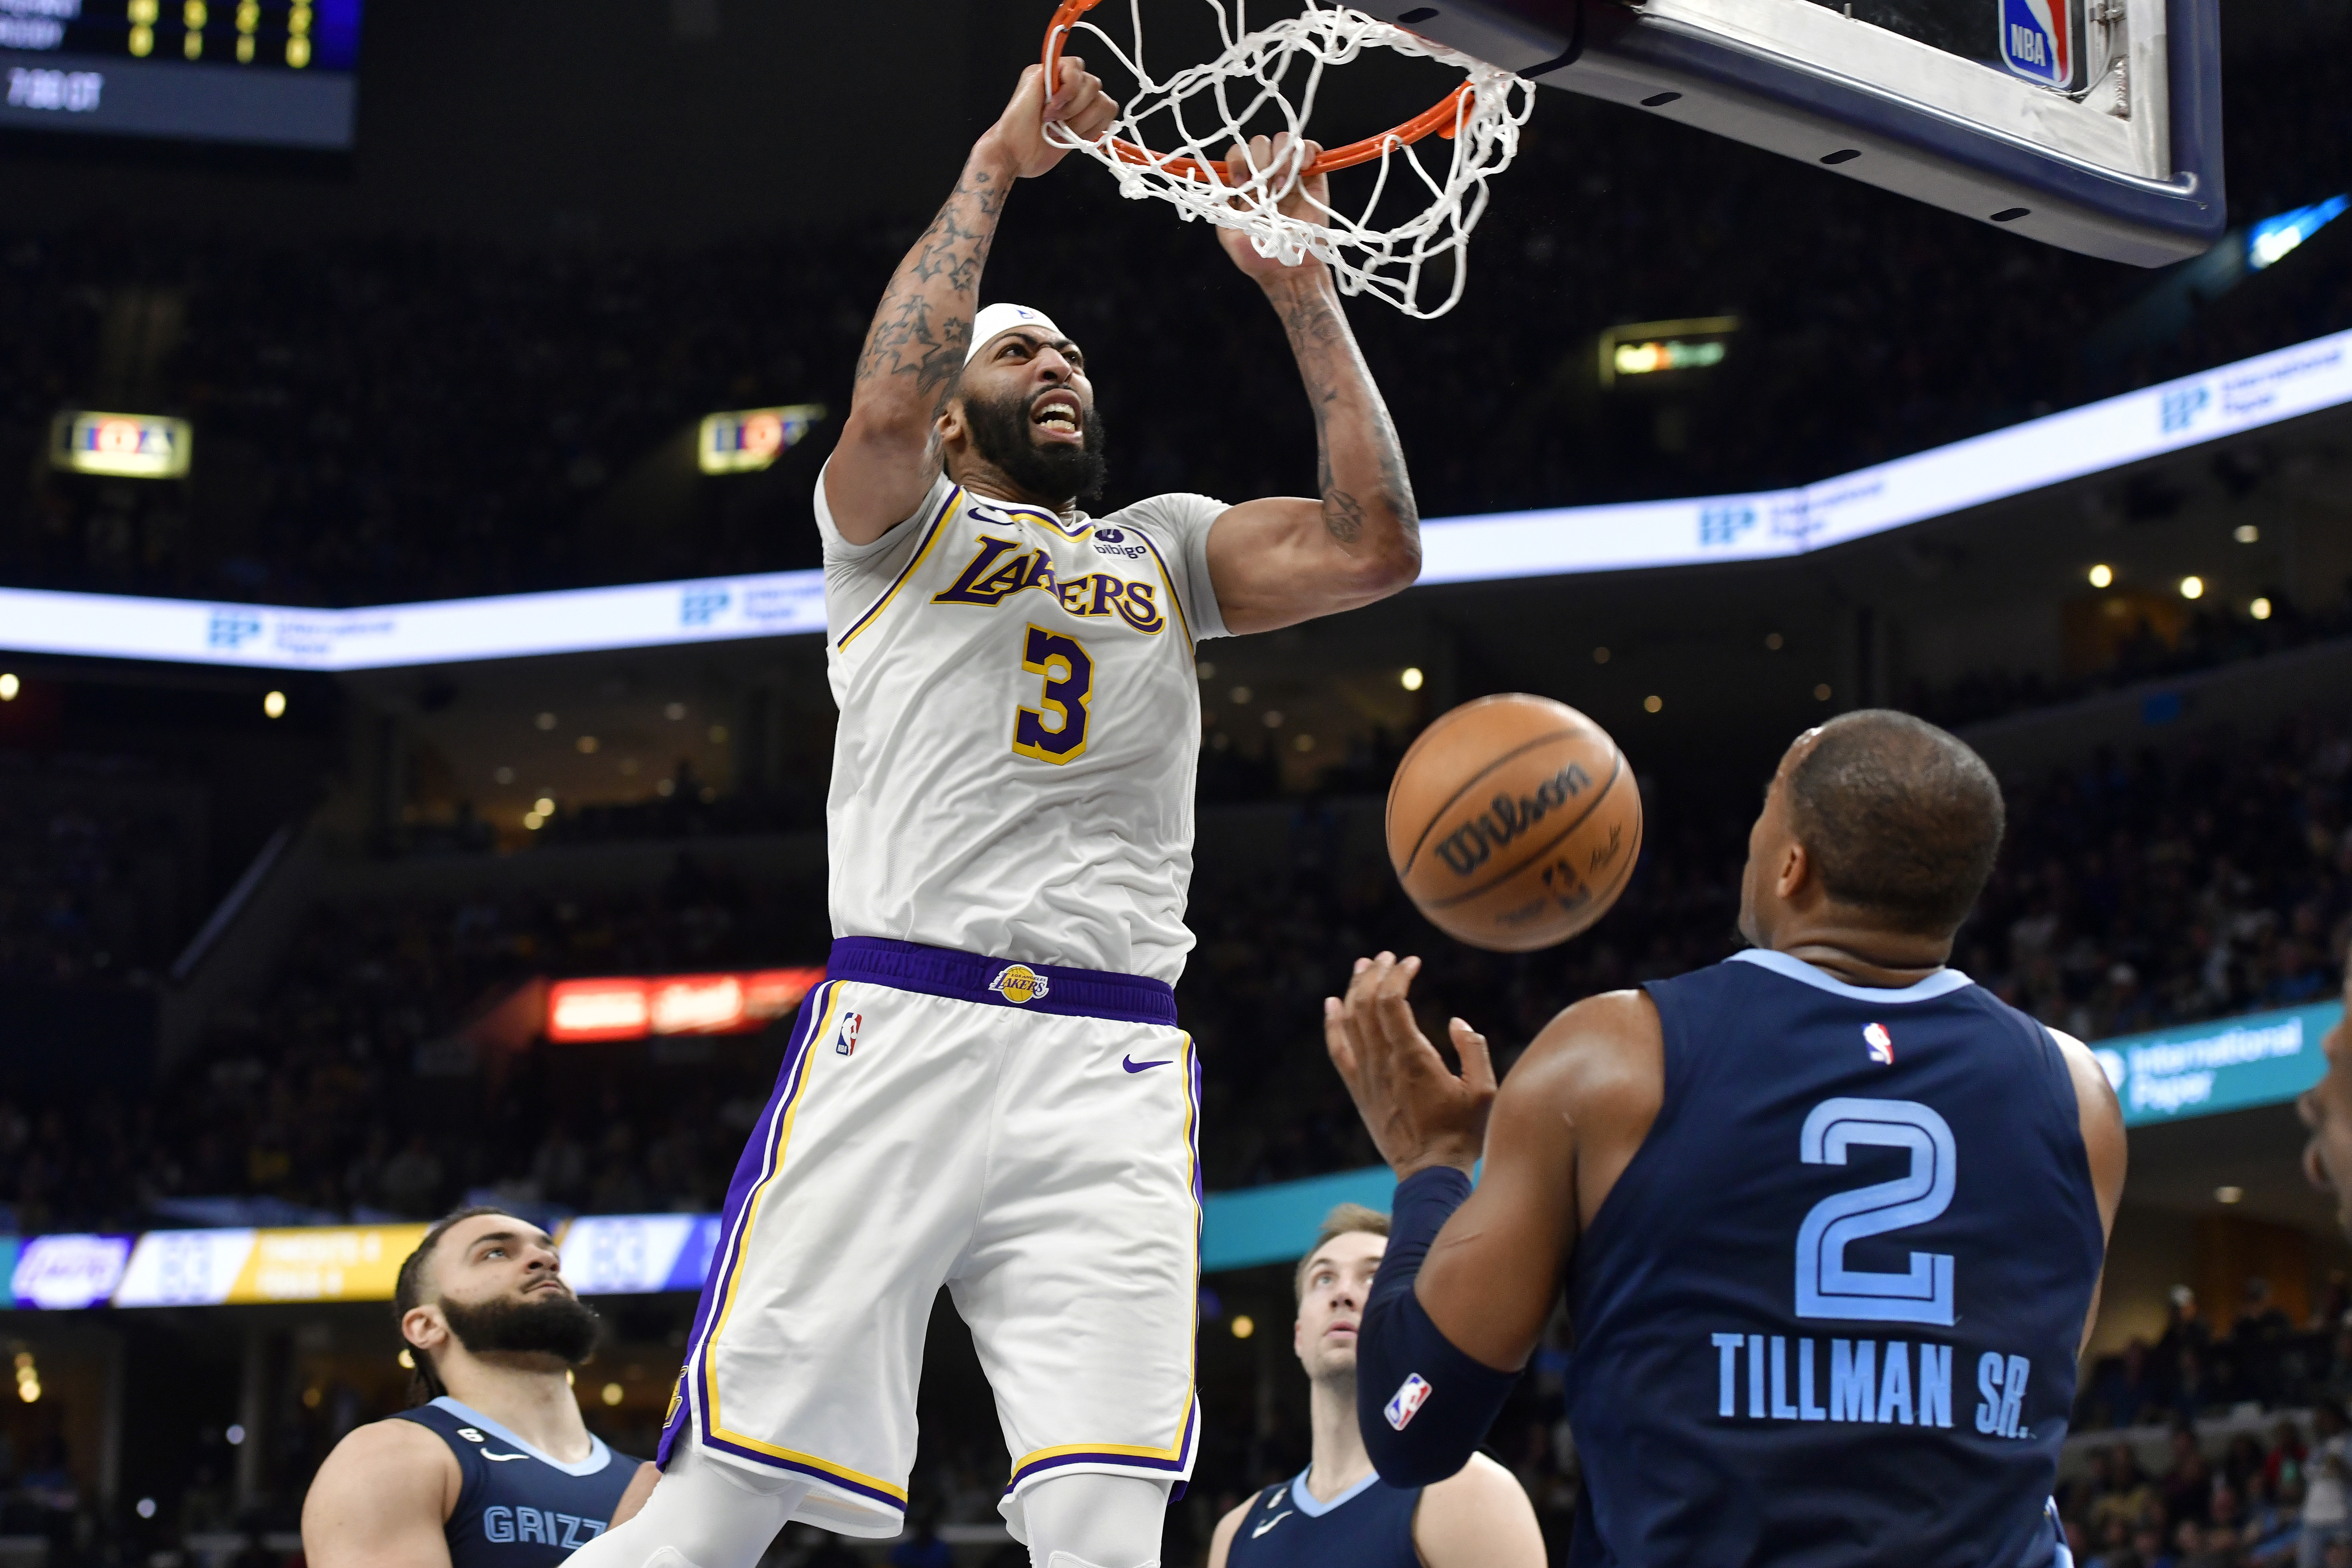 Memphis Grizzlies vs. Los Angeles Lakers: Live updates from Game 1